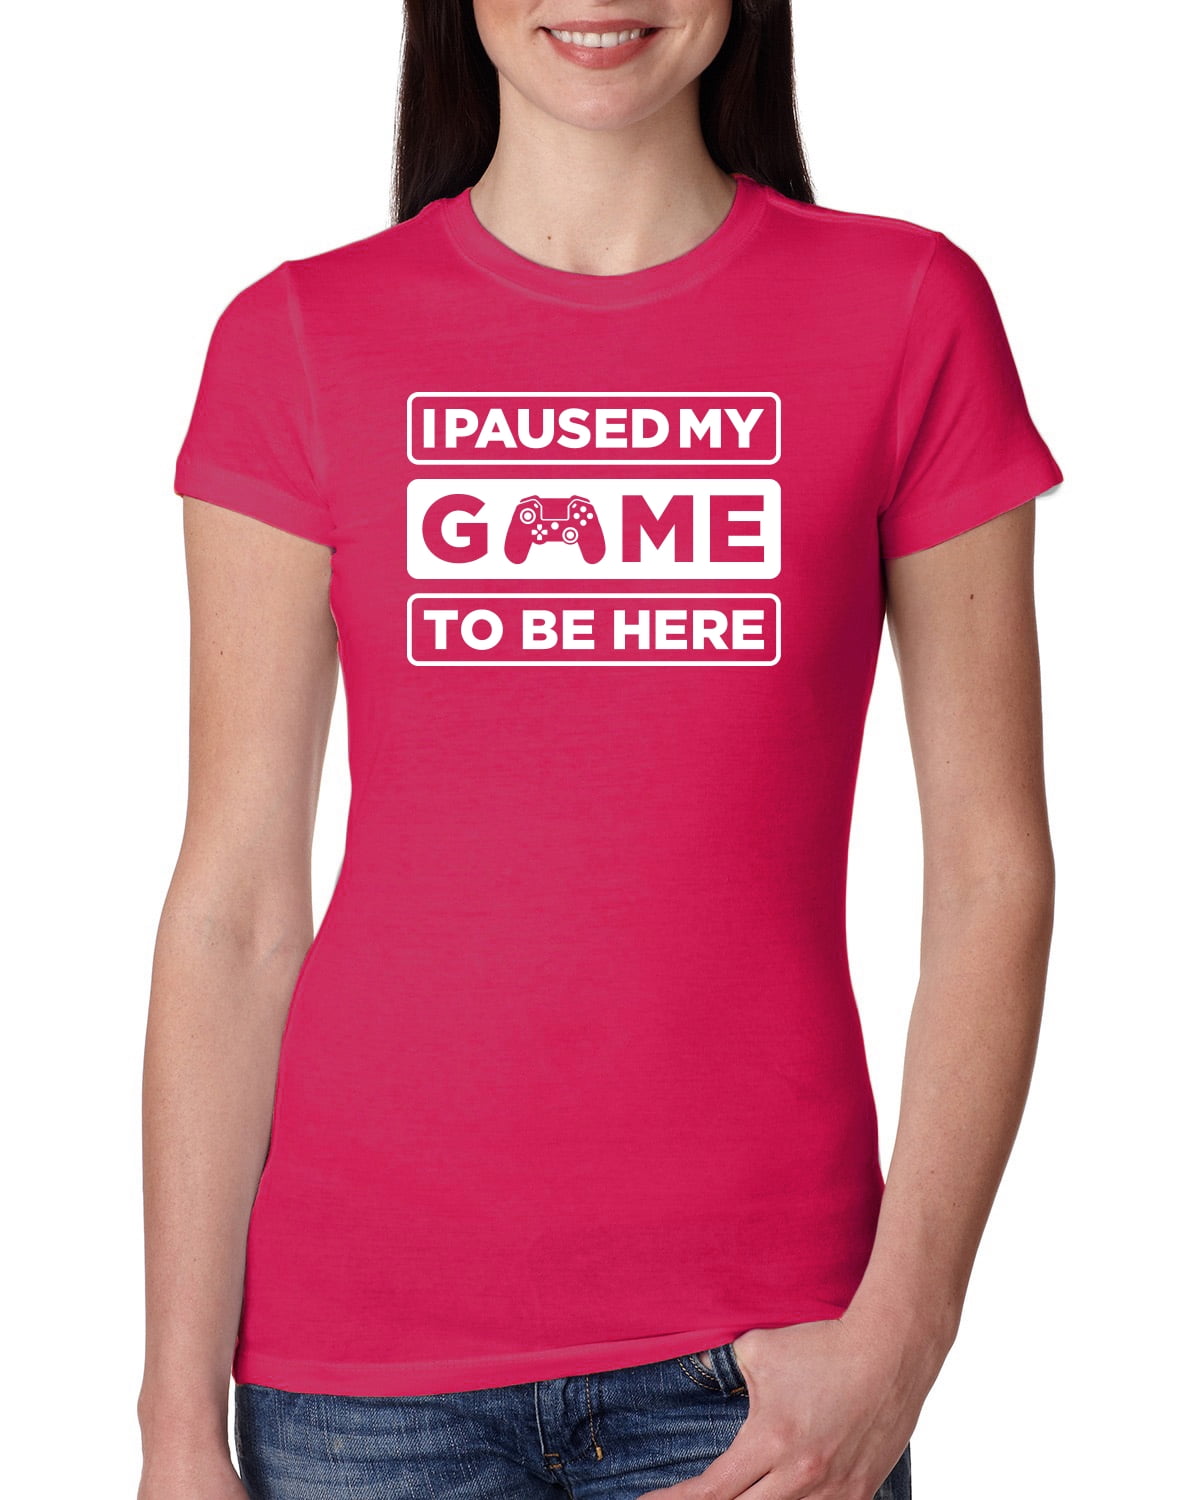 I Paused My Game to Be Here Womens Tshirt Short-Sleeve